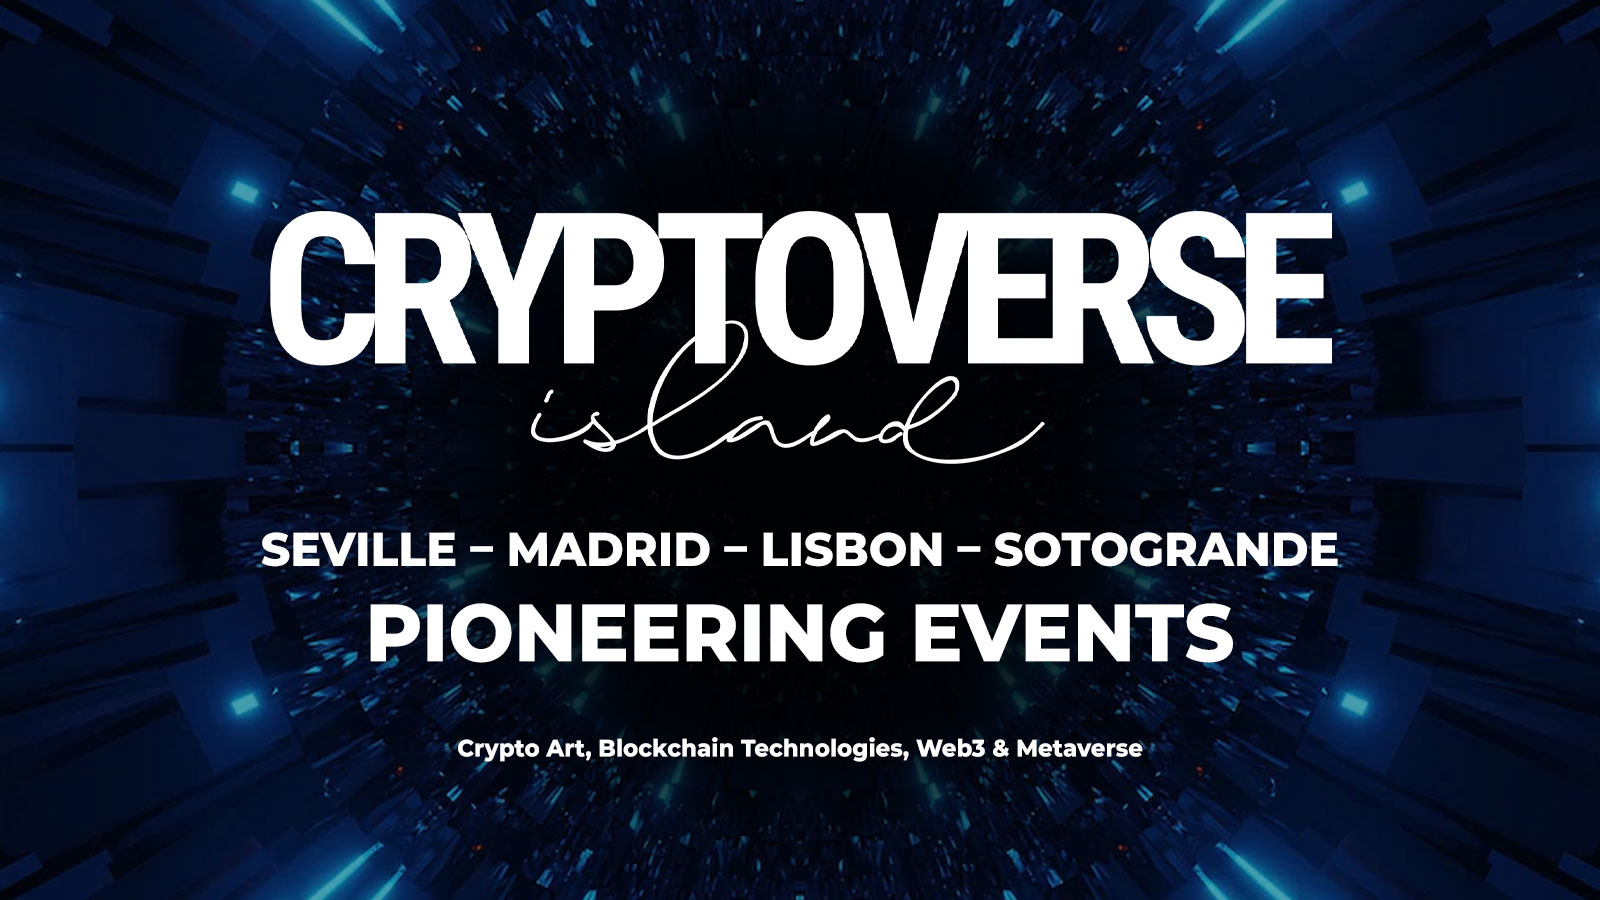 Sevilla Cryptoverse Island, a Physical NFT Art Exhibition Powered by WISe.art